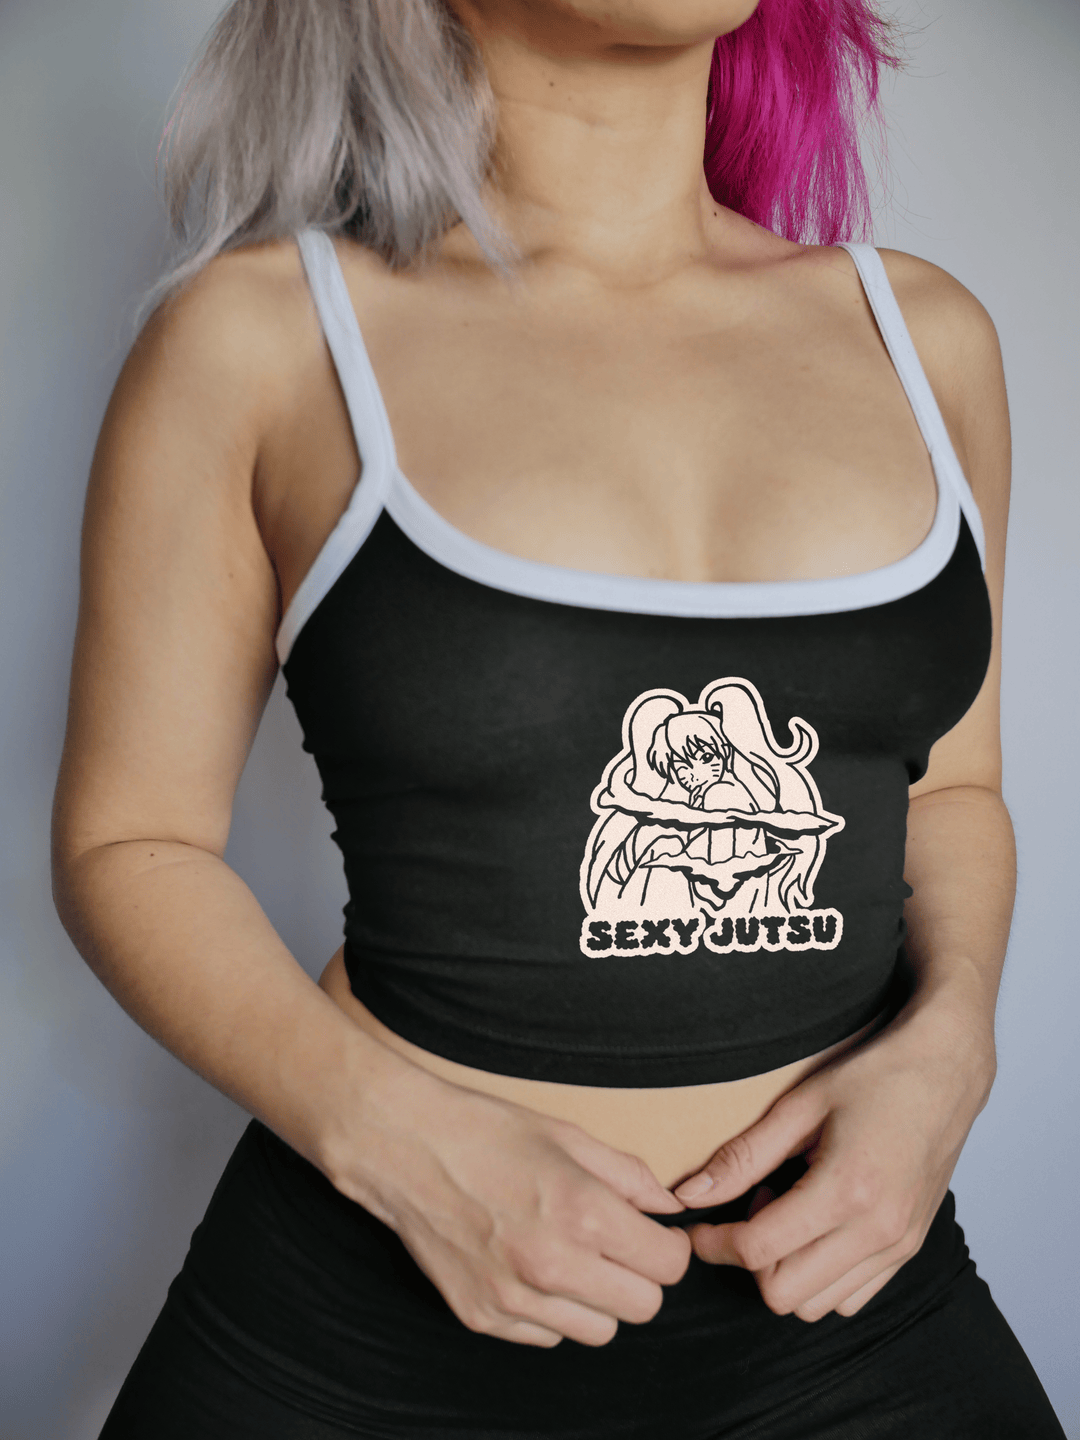 https://cdn.shopify.com/s/files/1/0438/6884/8285/products/pixelthat-punderwear-cami-crop-top-sexy-jutsu-cami-crop-top-41055844303122.png?v=1679671414&width=1080